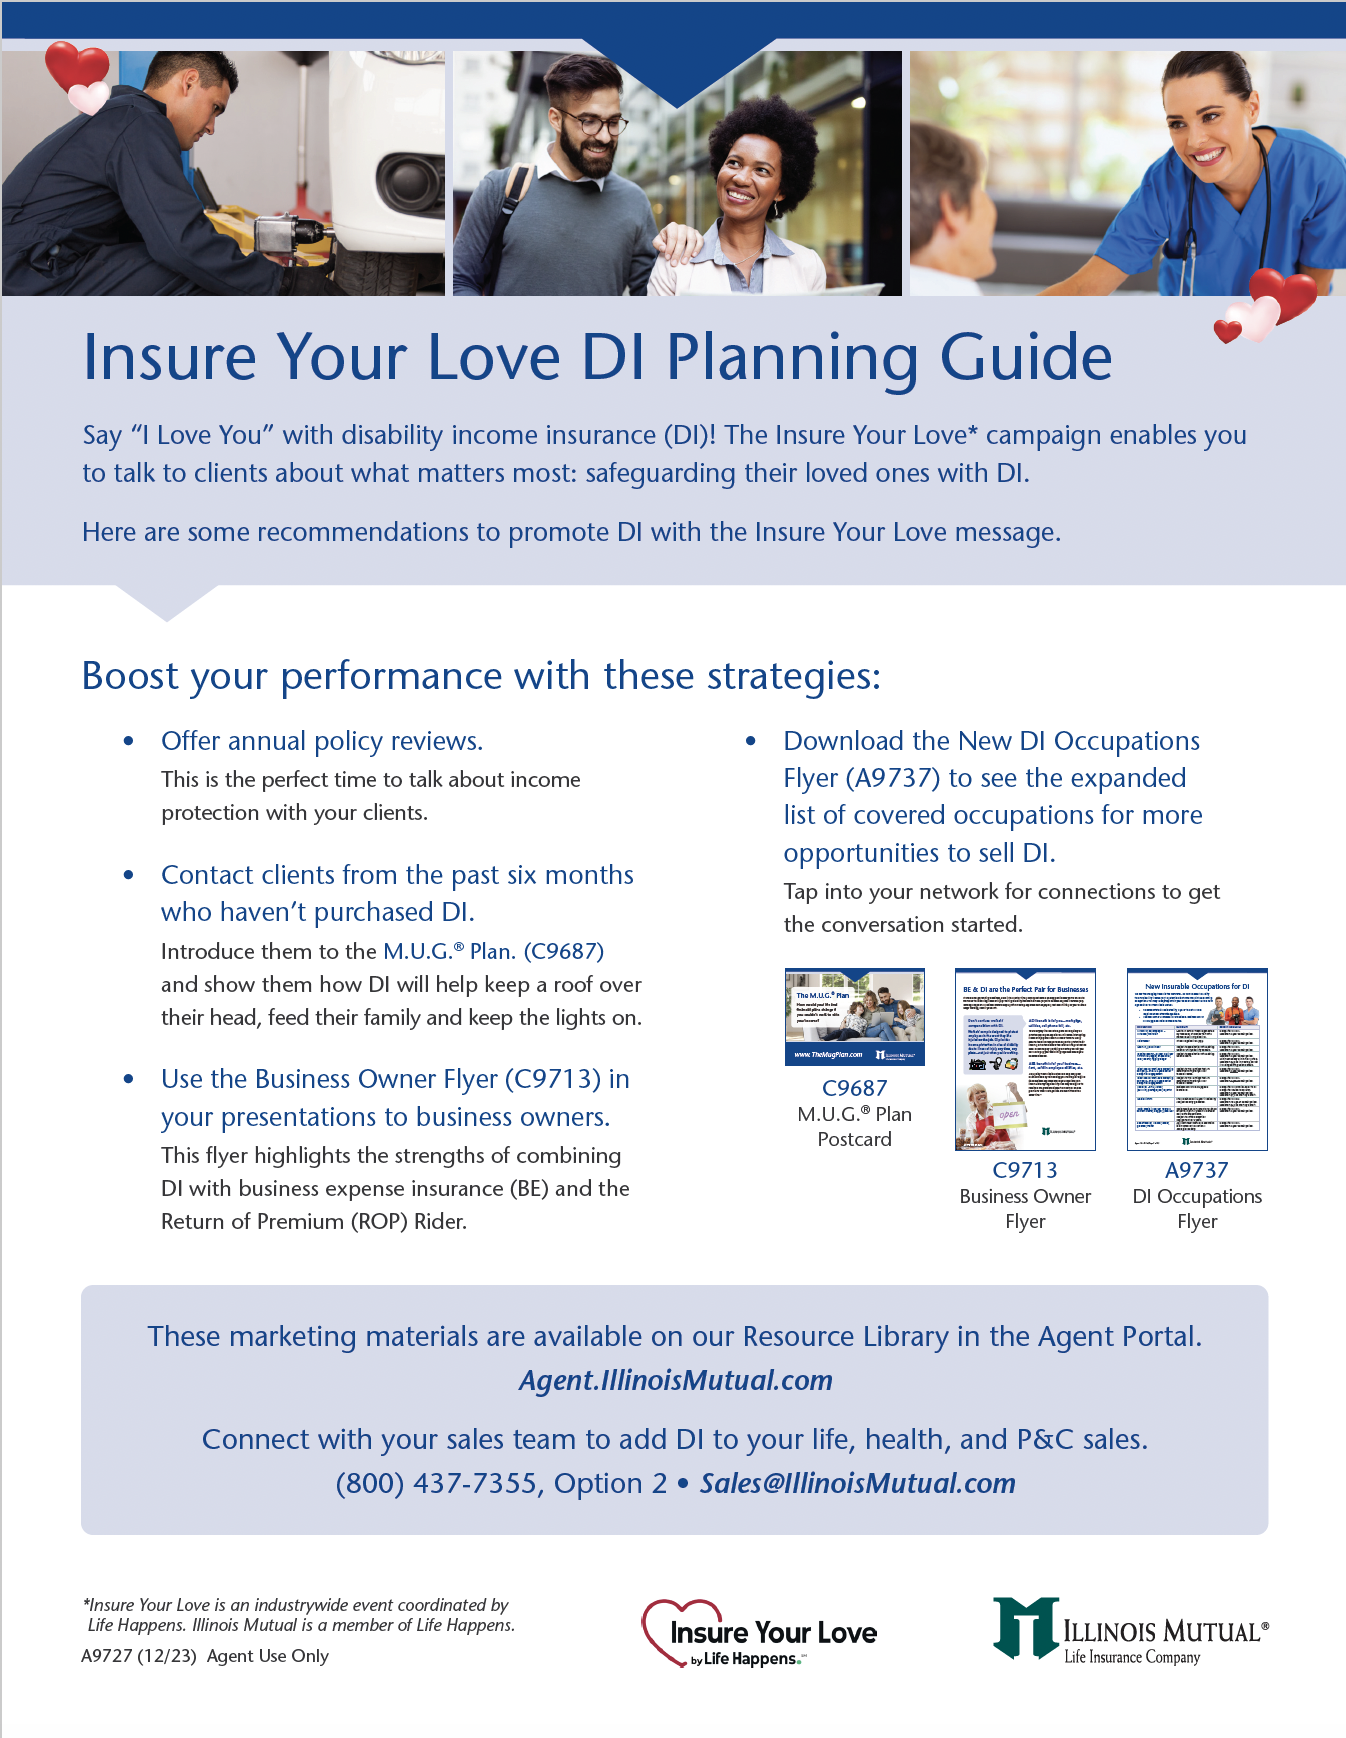 DI Insure Your Love Planning Guide